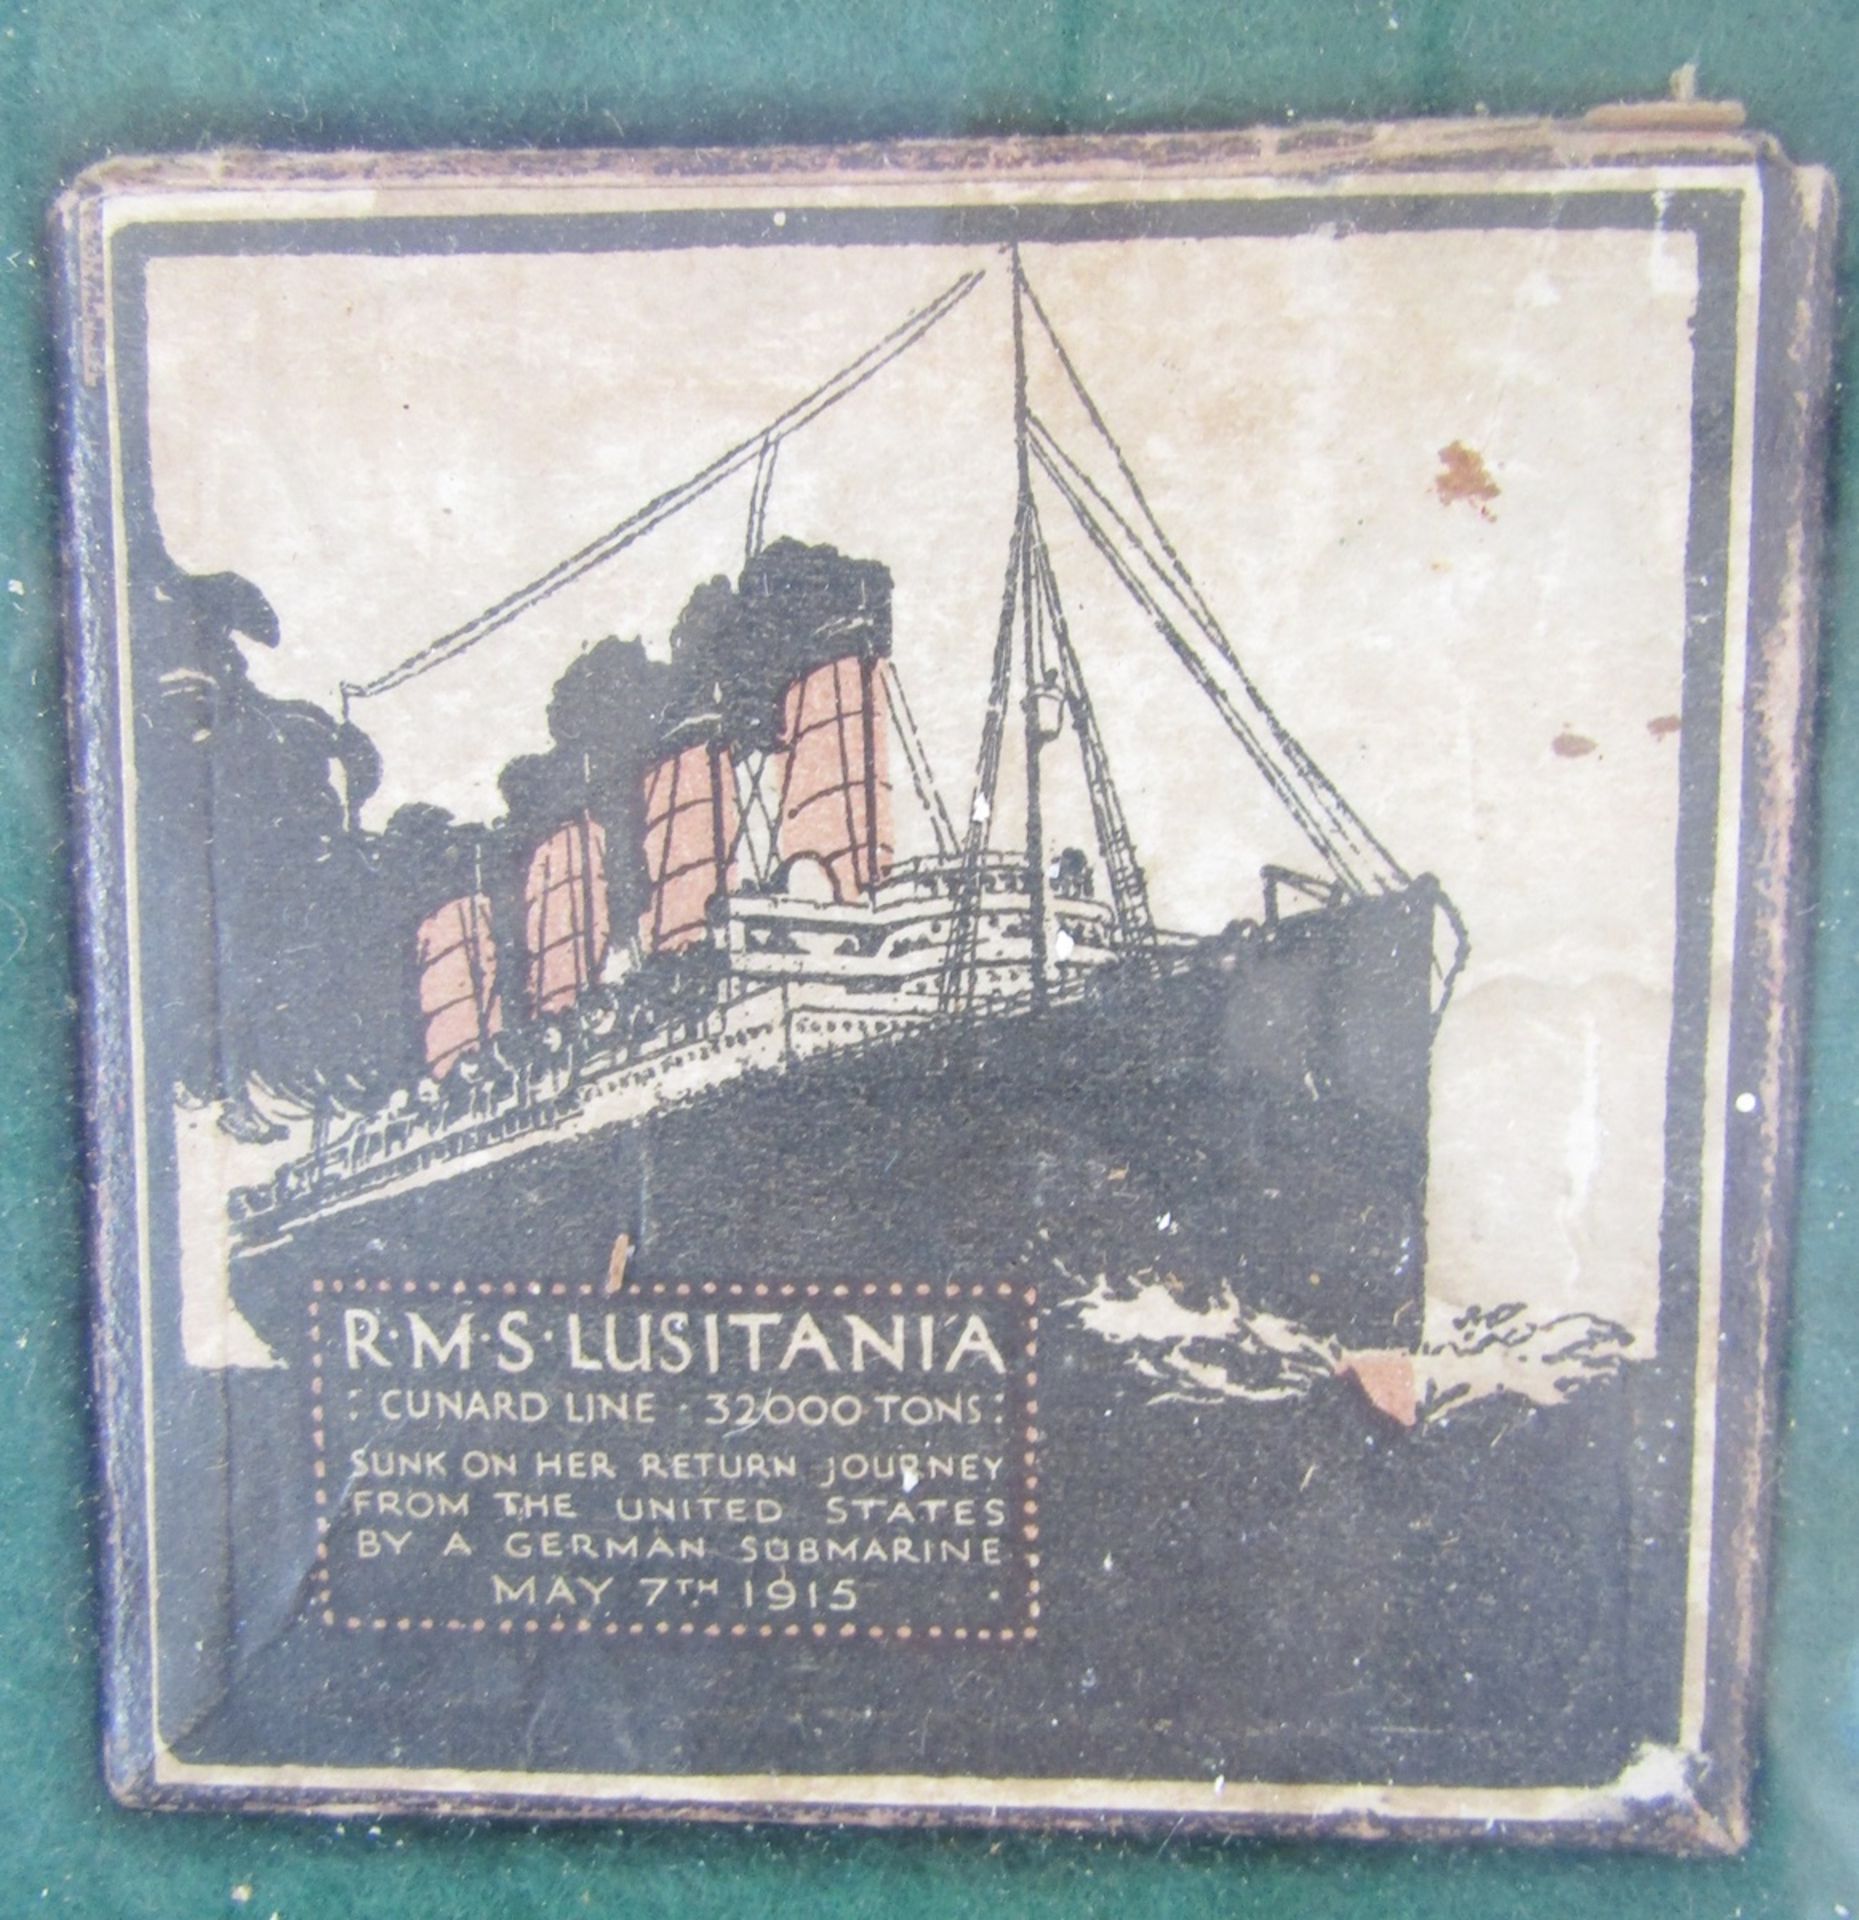 Two WWI RMS Lusitania medals with box and leaflet within glazed frame. - Image 2 of 4